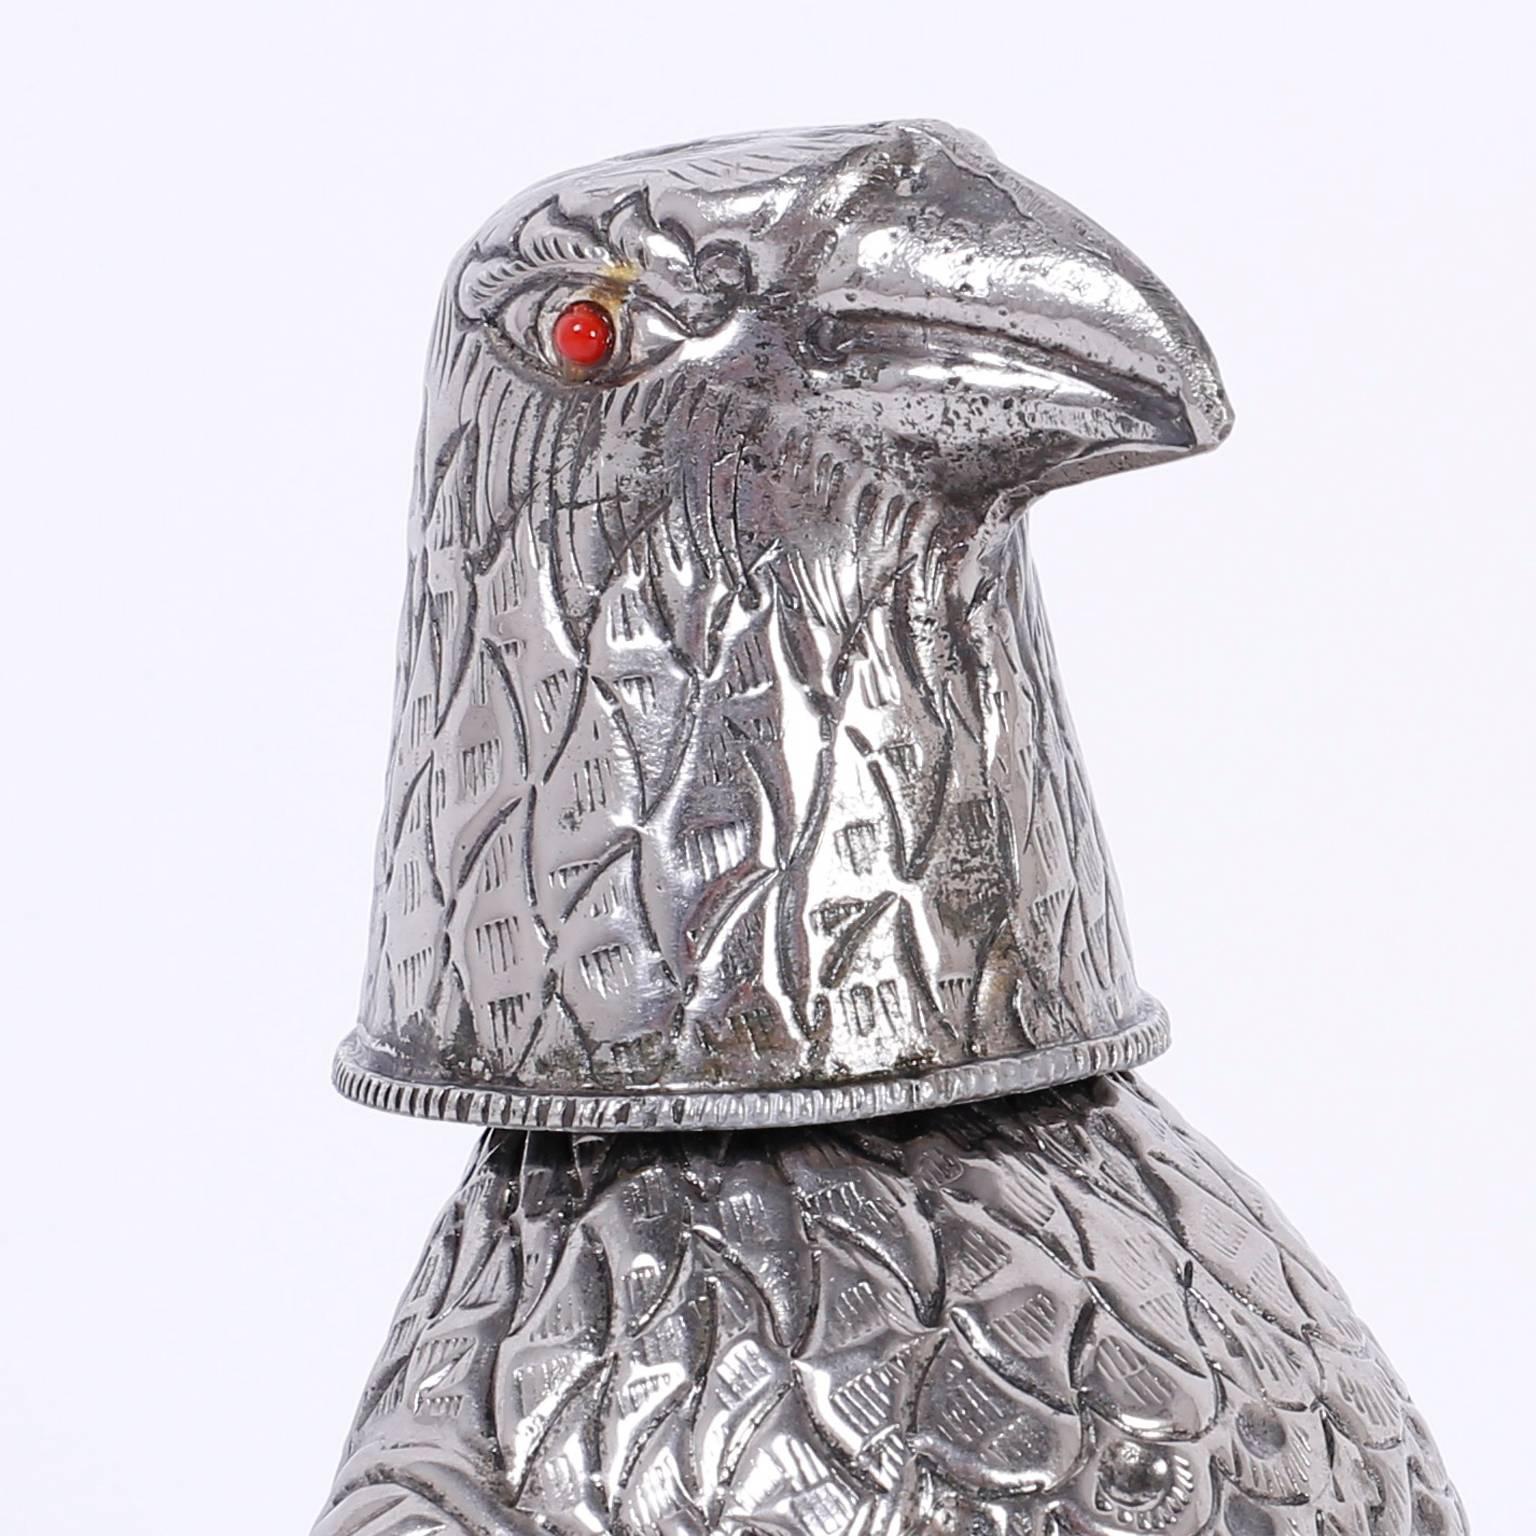 Amusing silvered metal decanter or flask depicting a curious stylized falcon or bird with glass eyes and a removable head.